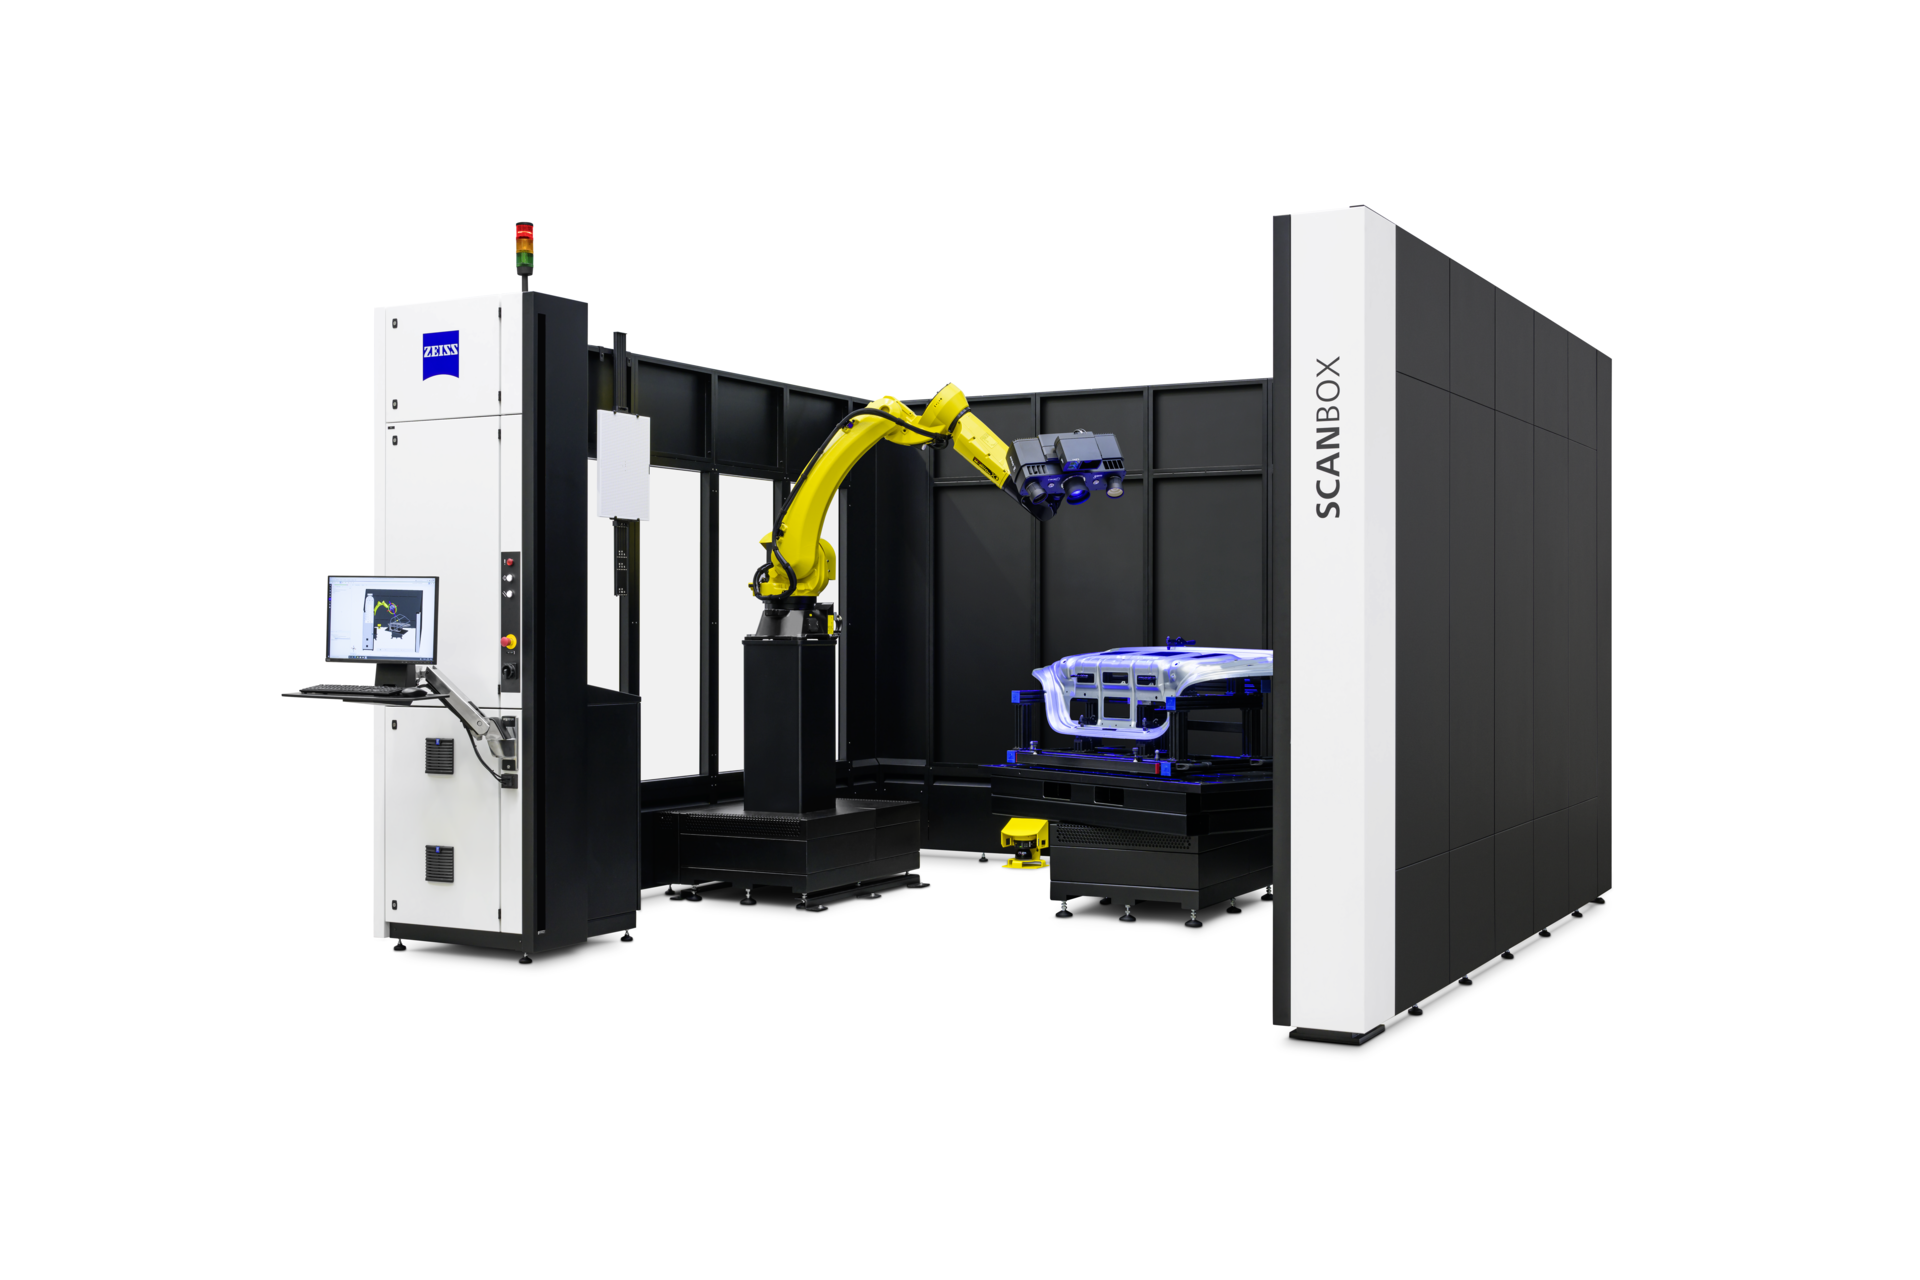 zeiss scanbox 5130 automated 3D scanning for large parts